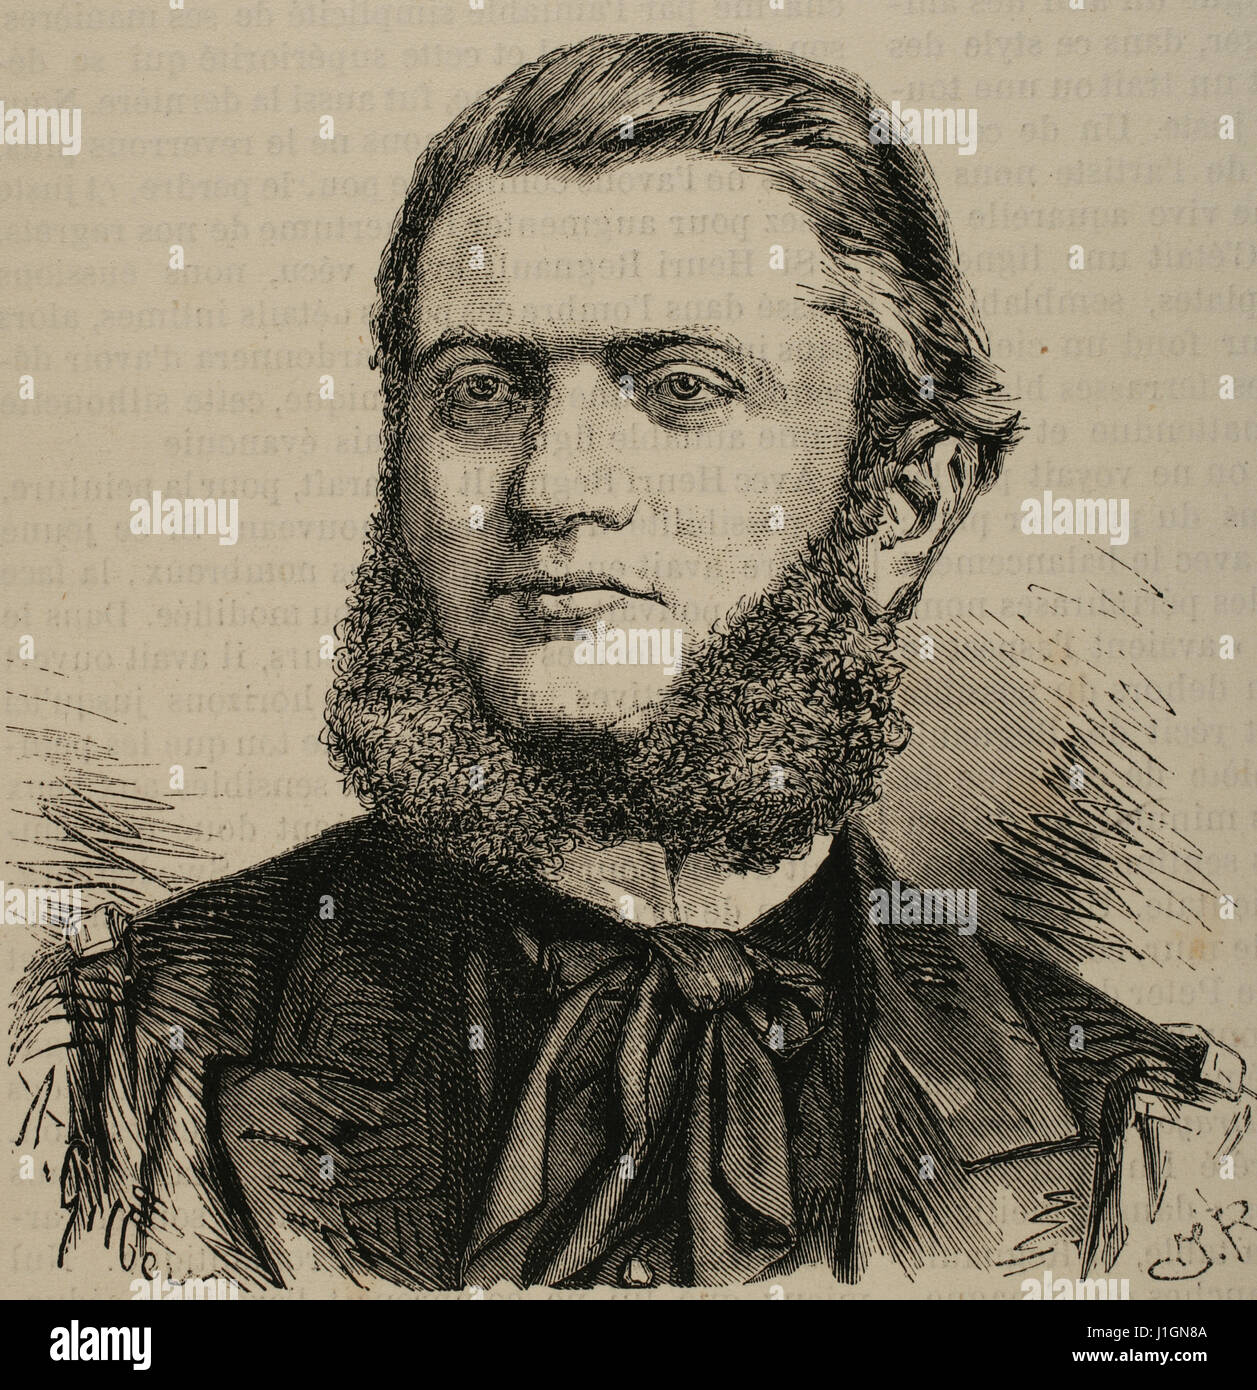 Marcel Foillard (1838-1871). French military. Portrait. Engraving by A. Gilber. 'L'Illustration, Journal Universel', 1871. Stock Photo